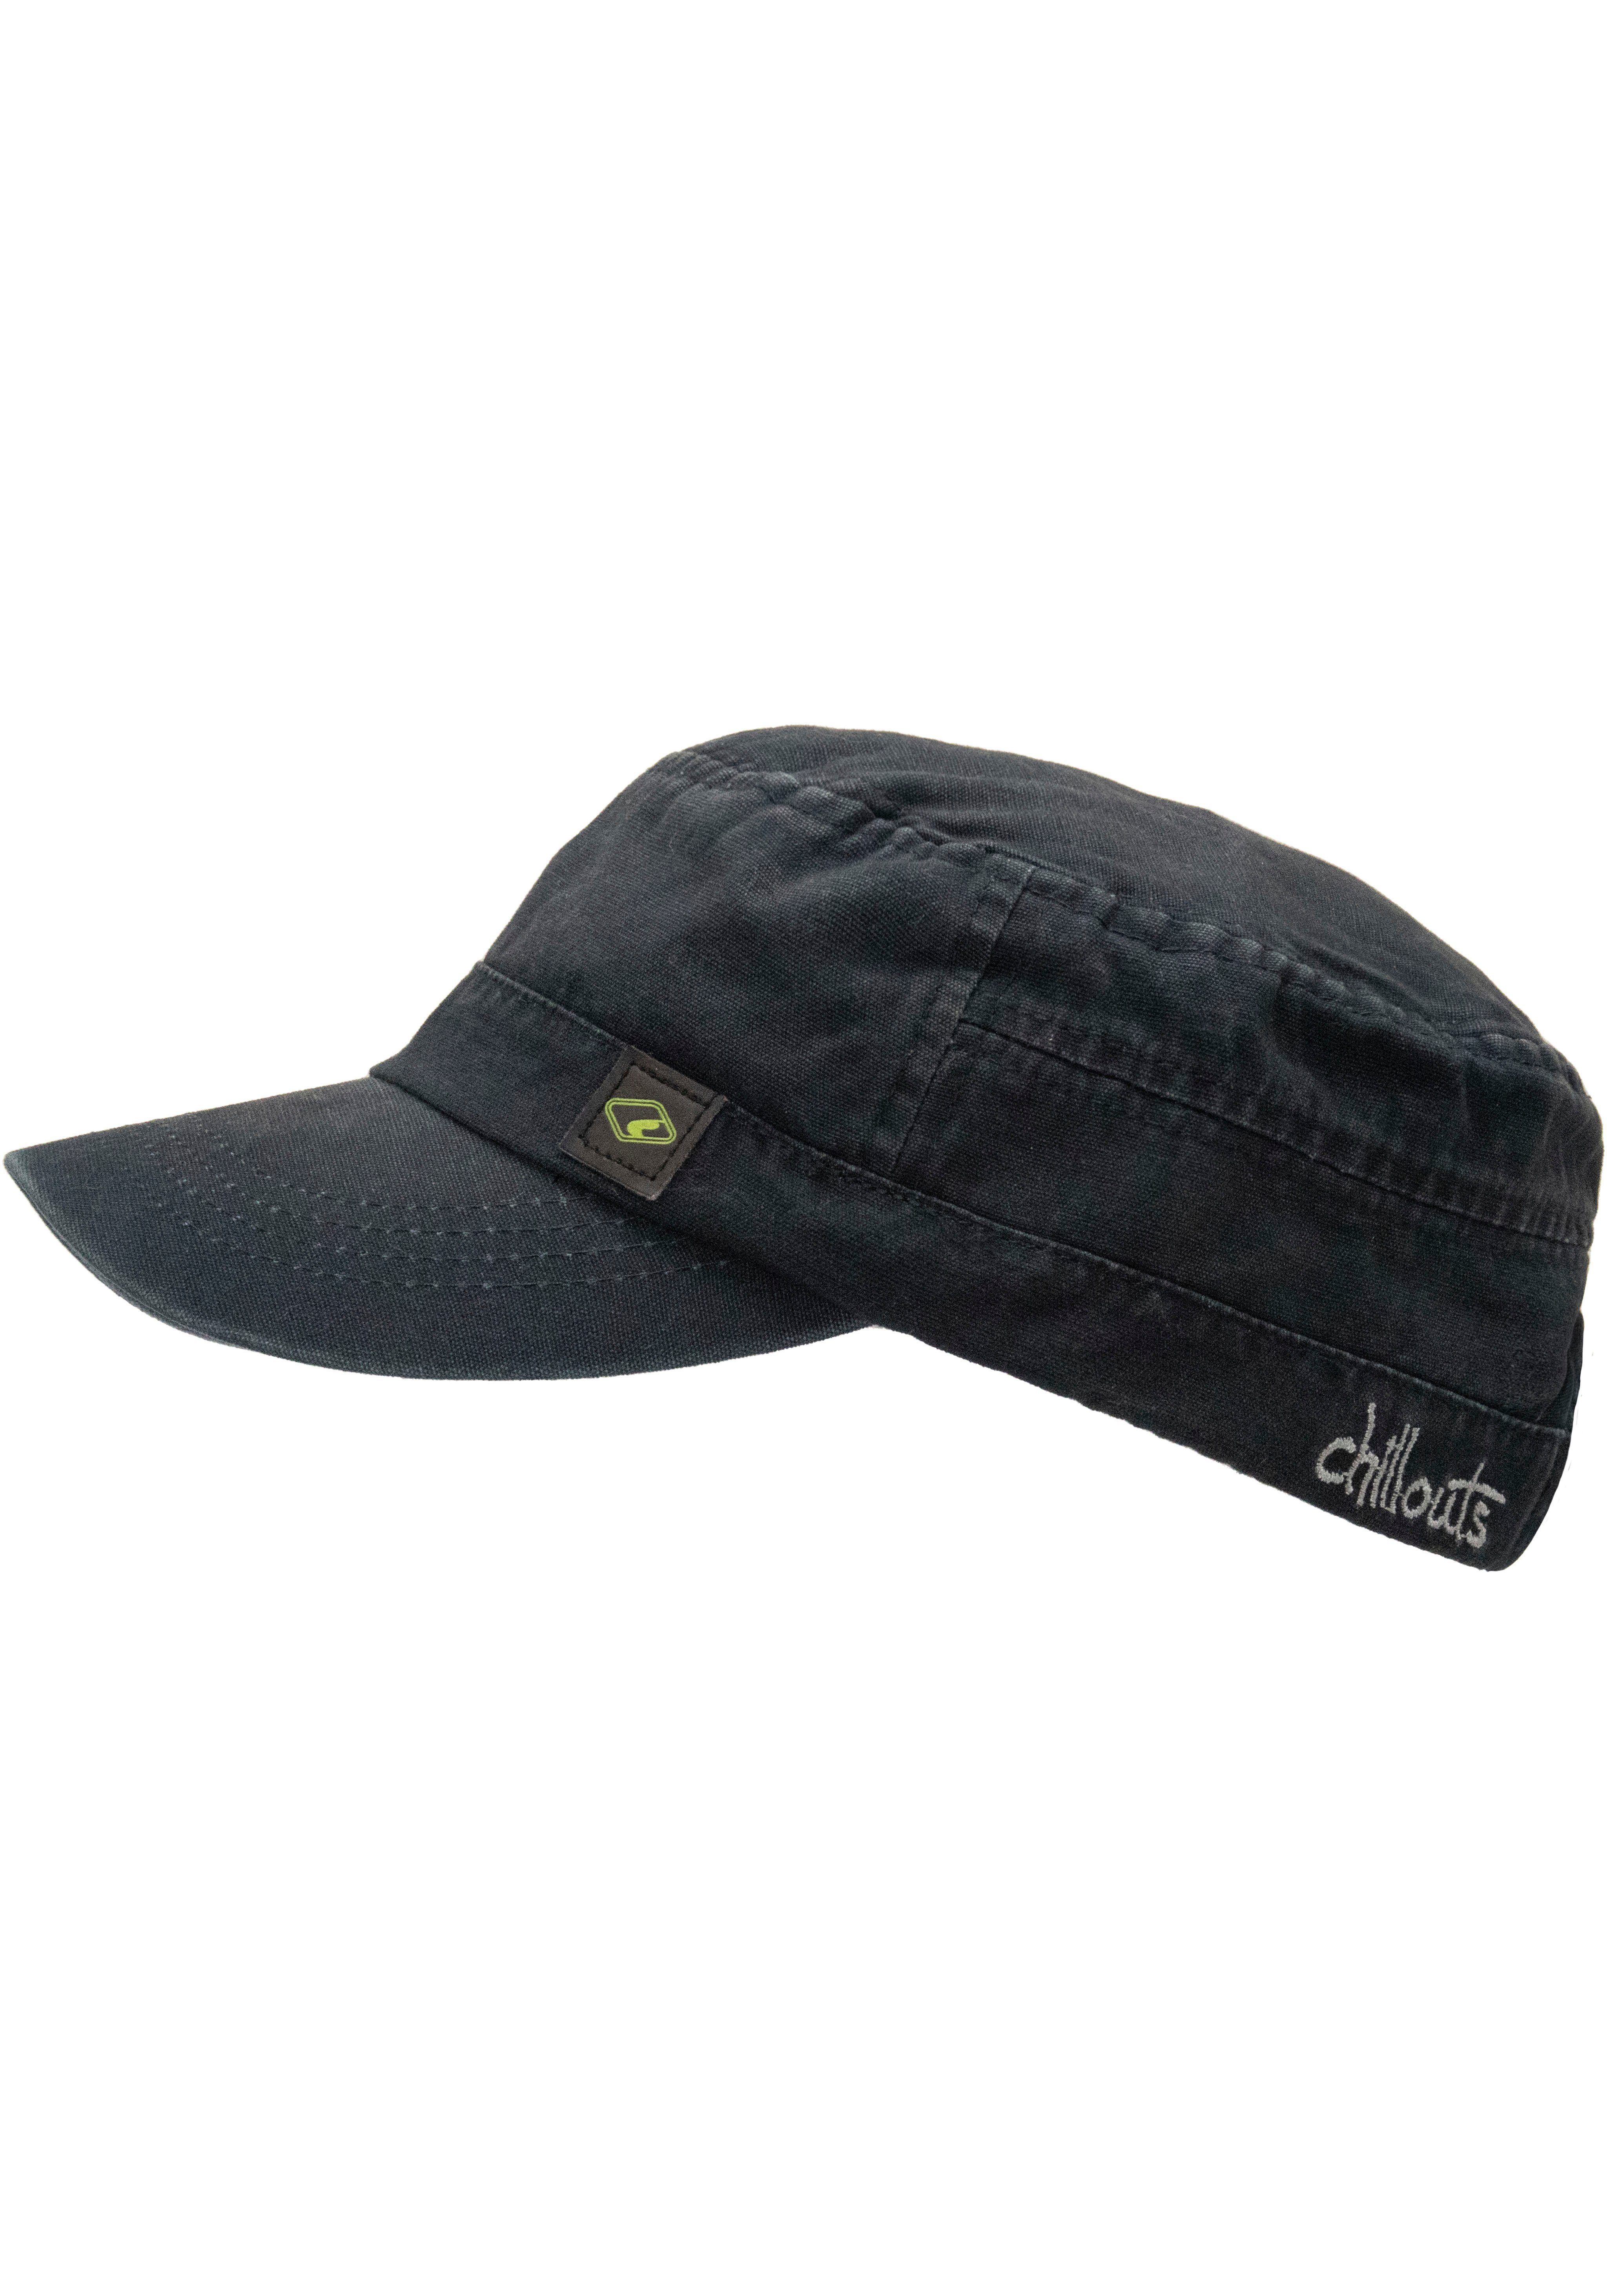 chillouts Army Cap El Paso Hat aus reiner Baumwolle, atmungsaktiv, One Size washed navy